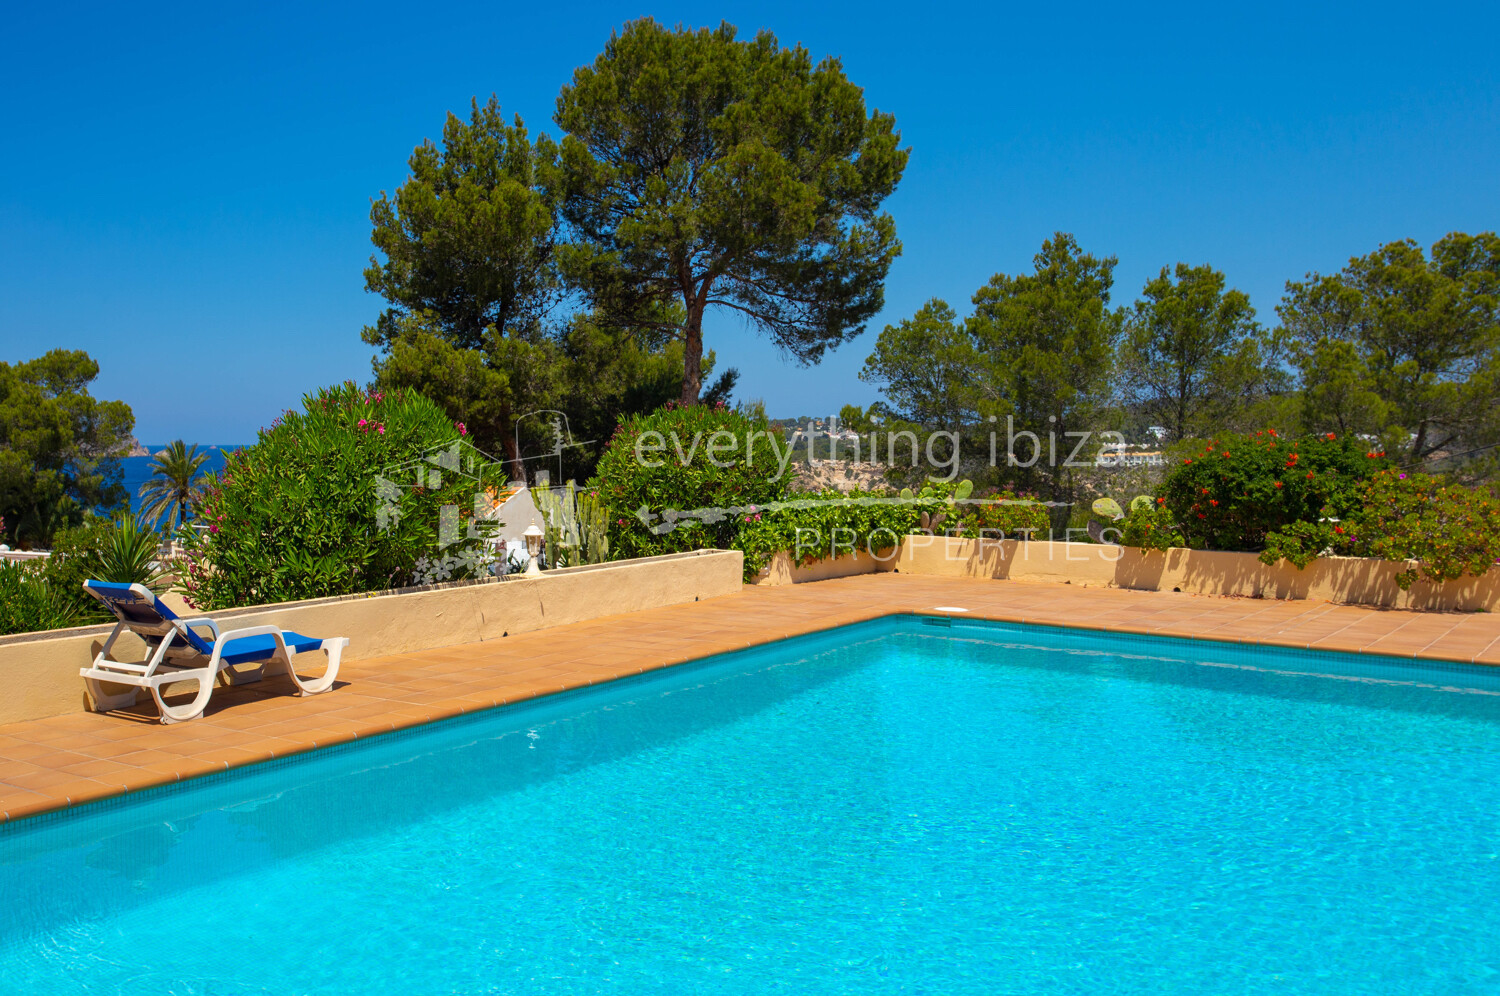 Beautiful Villa Close to Beach with Stunning Sea and Sunset Views, ref.1643, for sale in Ibiza by everything ibiza Properties